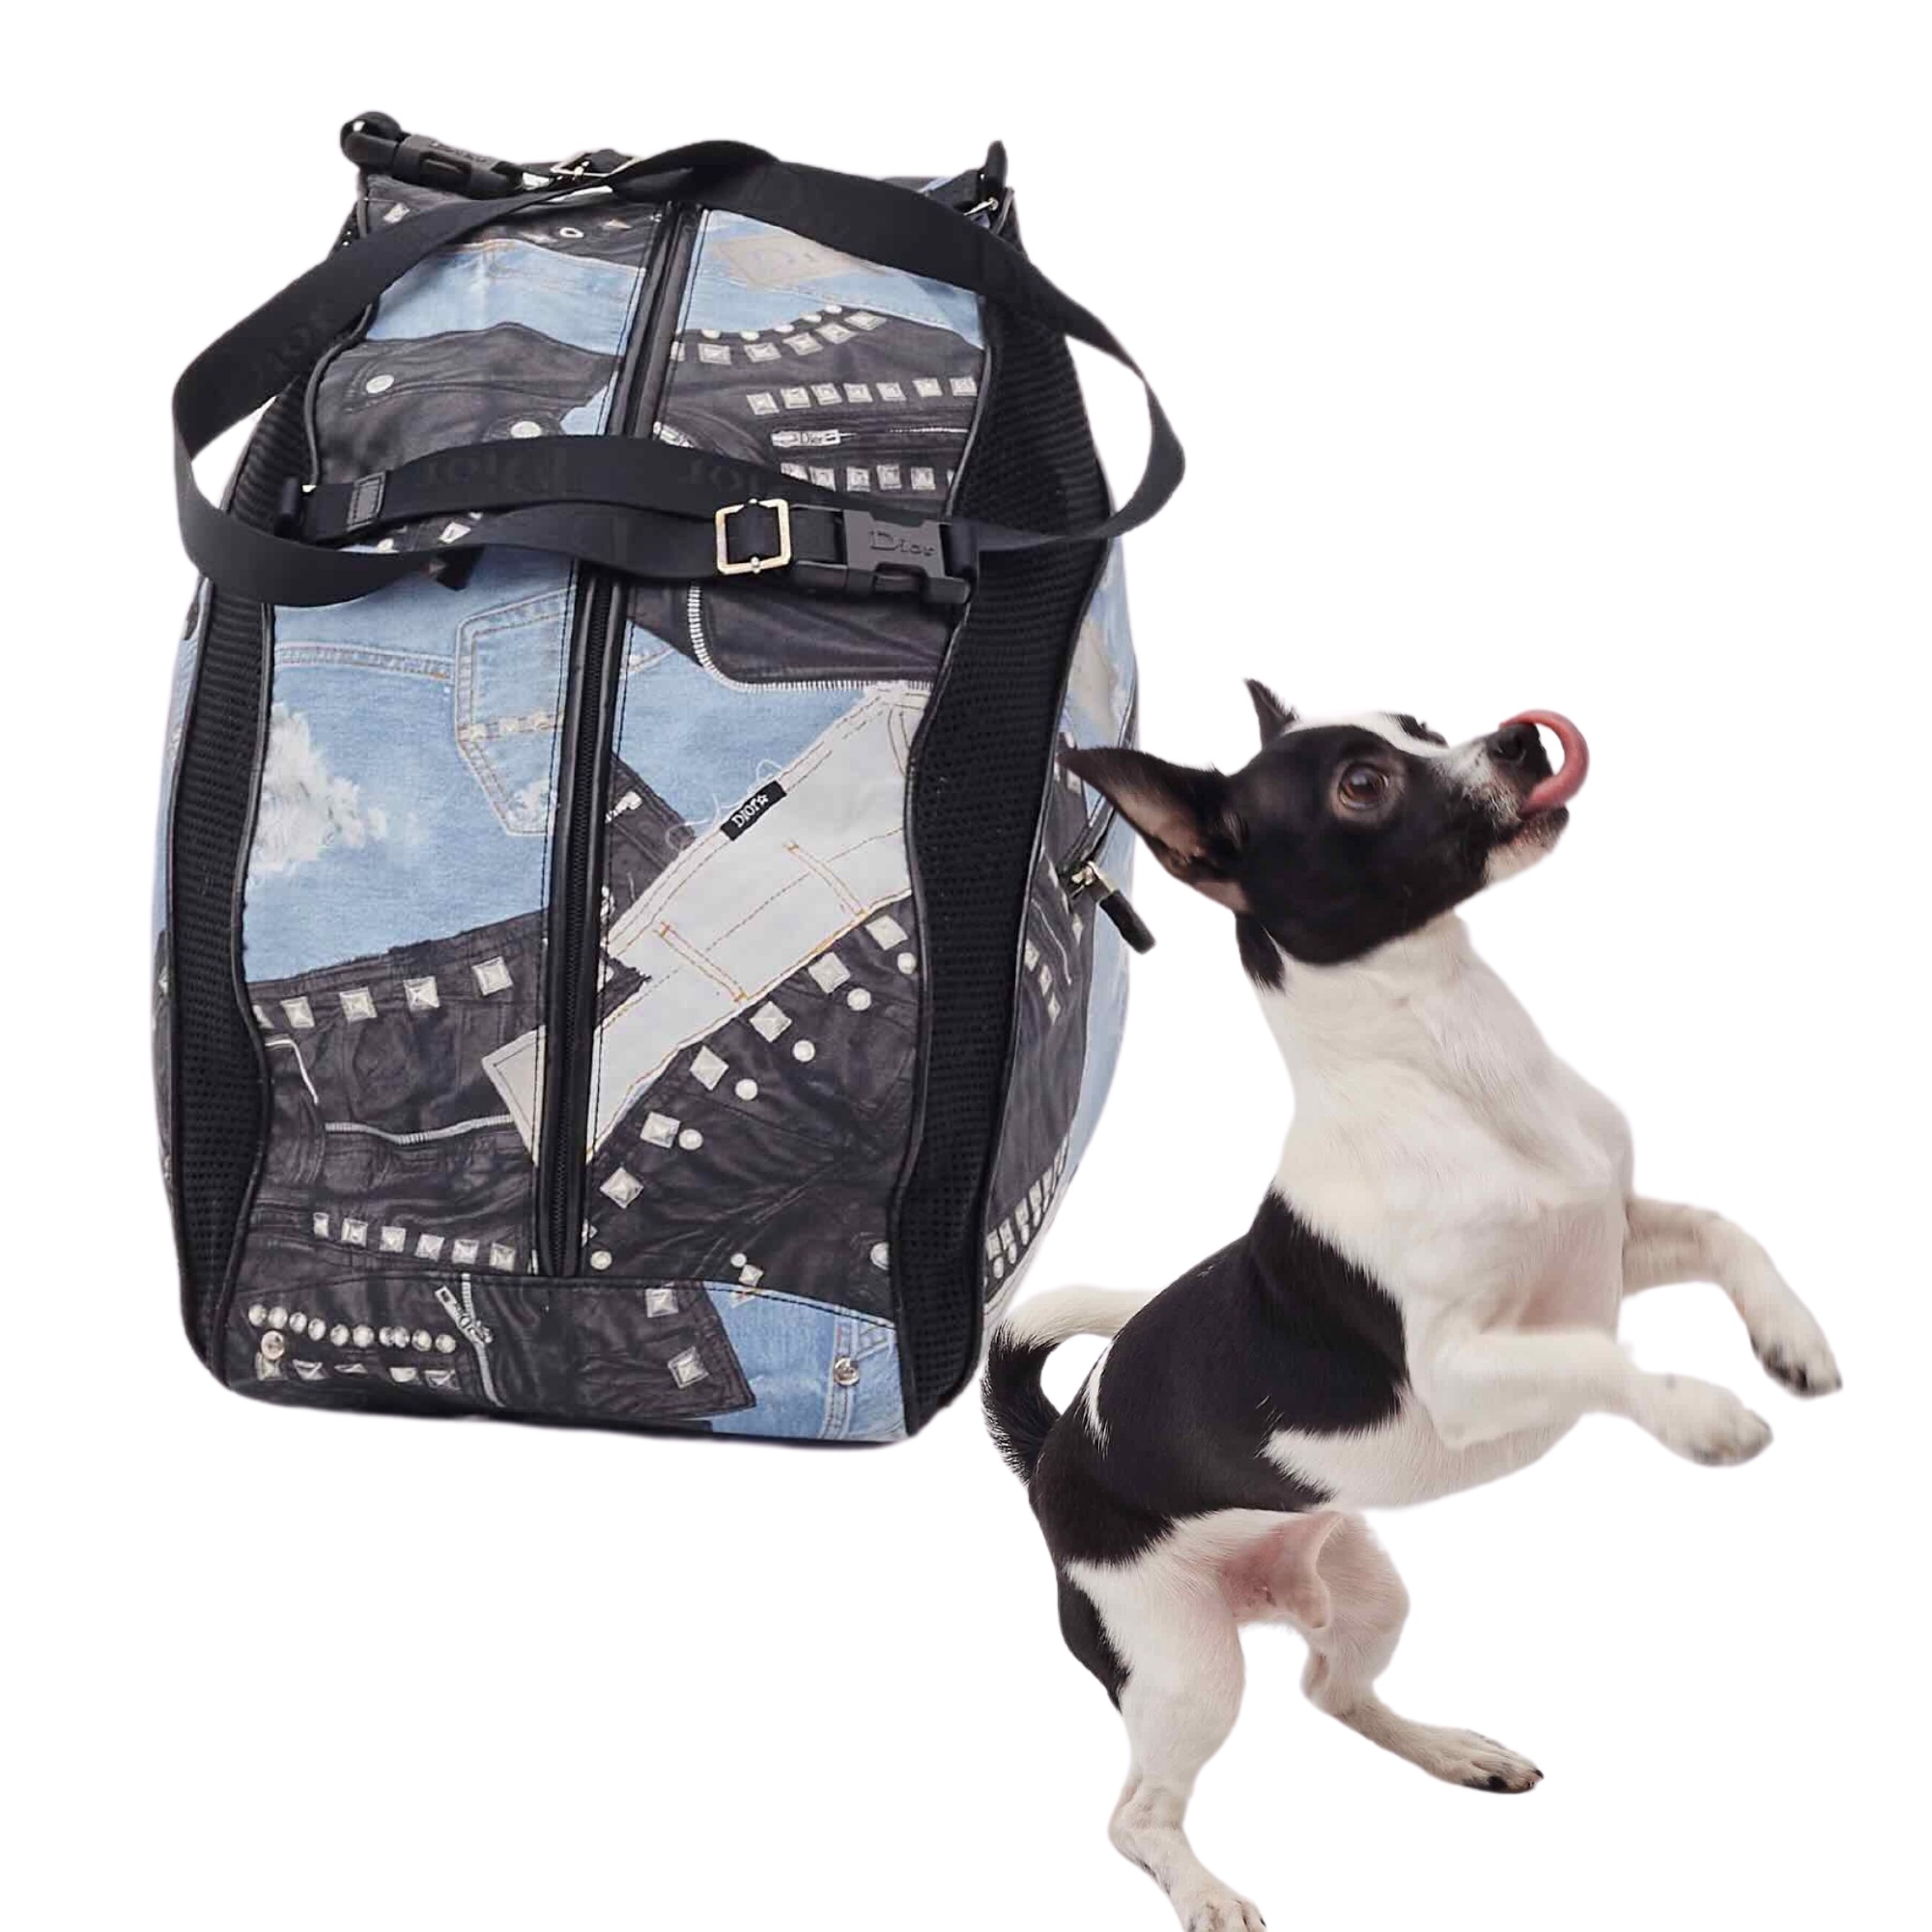 CHRISTIAN DIOR BLACK AND BLUE DENIM PATCHES DOG CARRIER 2004 GALLIANO